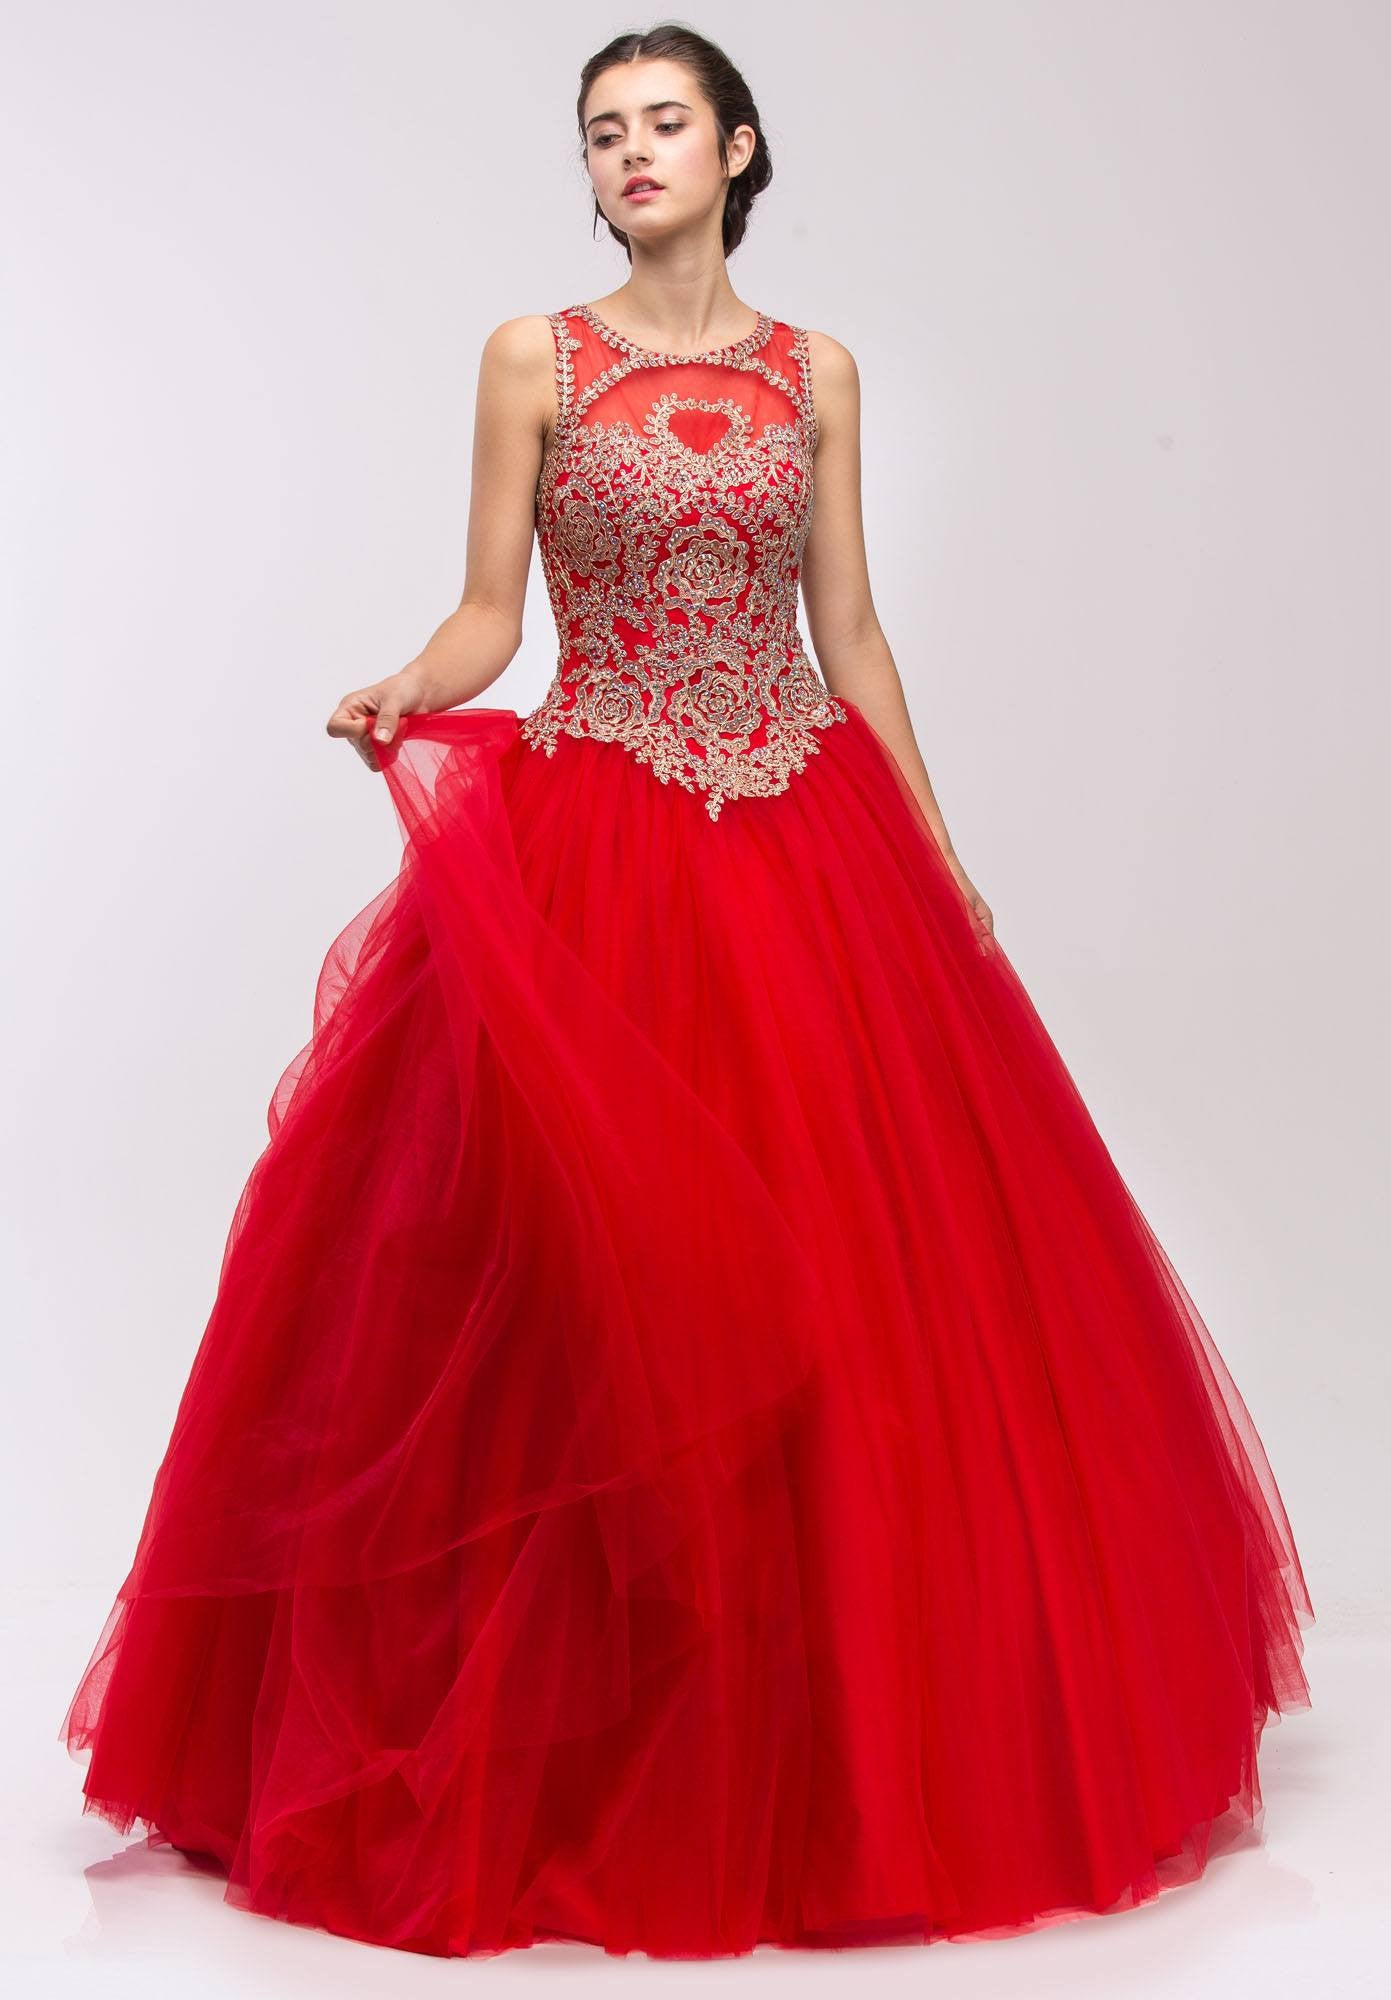 Red Quinceanera Dress with Golden Applique Cut-Out Back Sleeveless